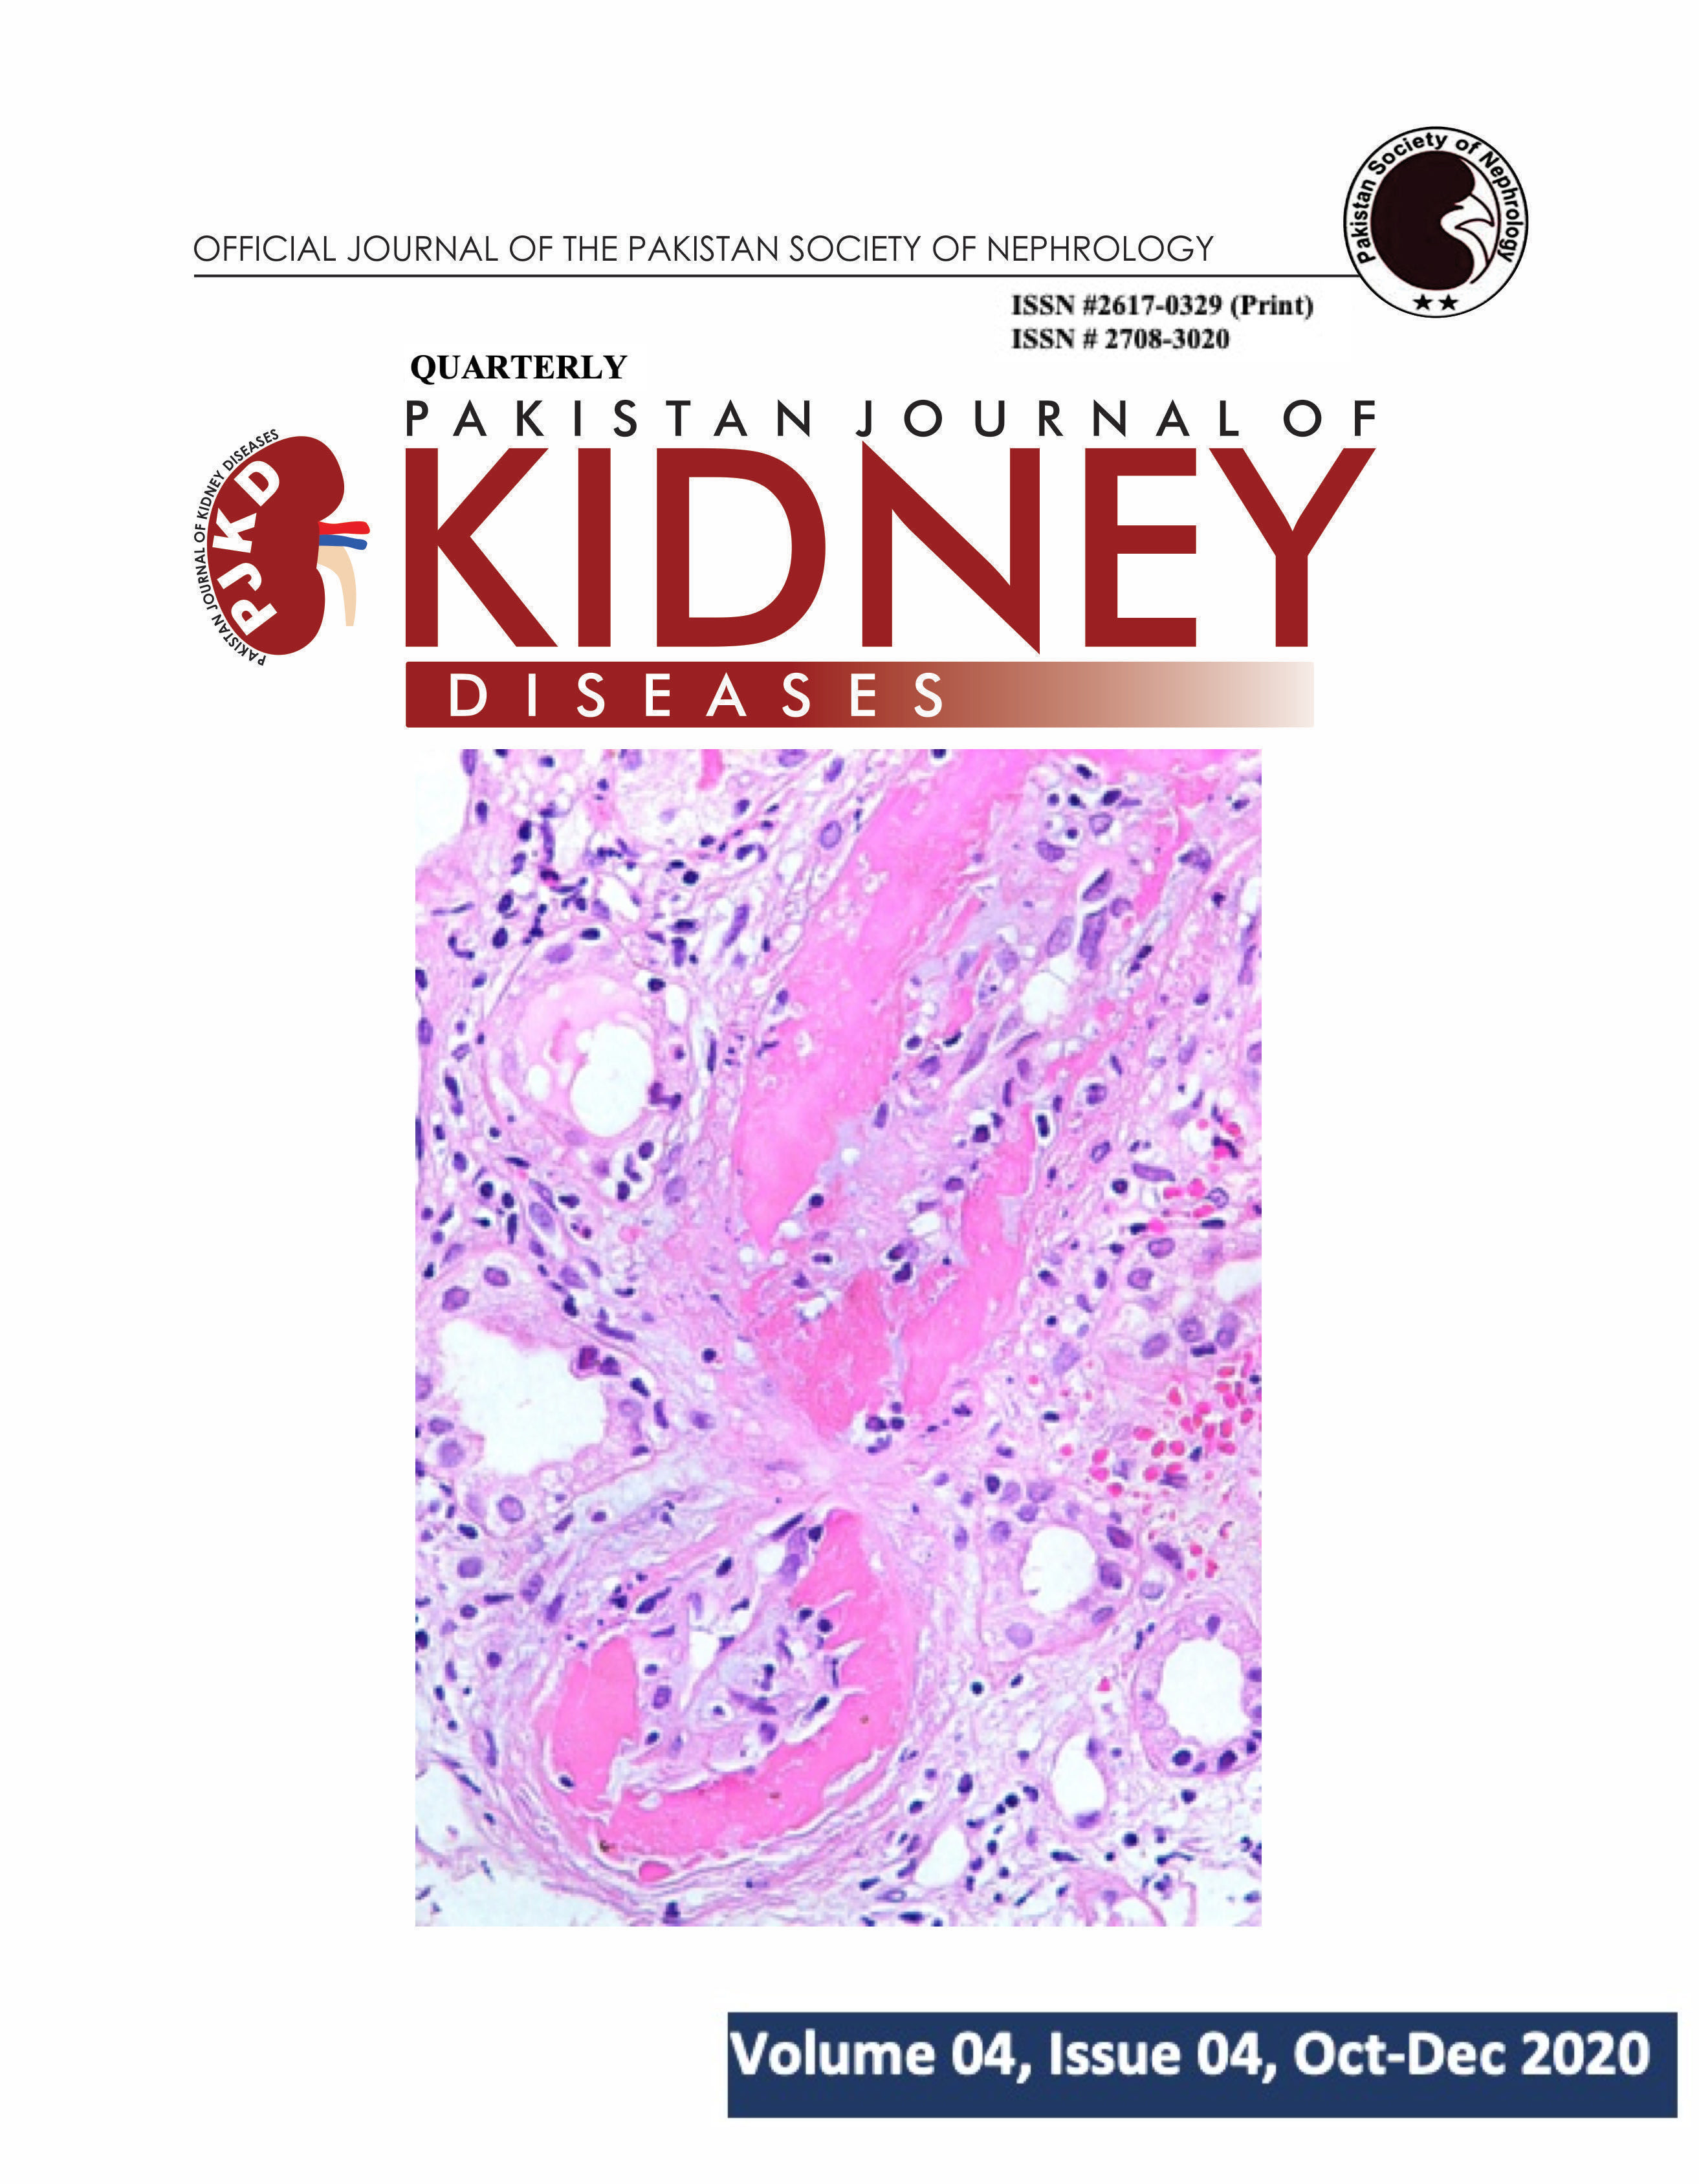 Nail‑Patella syndrome with early onset end‑stage renal disease in a child  with a novel heterozygous missense mutation in the LMX1B homeodomain: A  case report